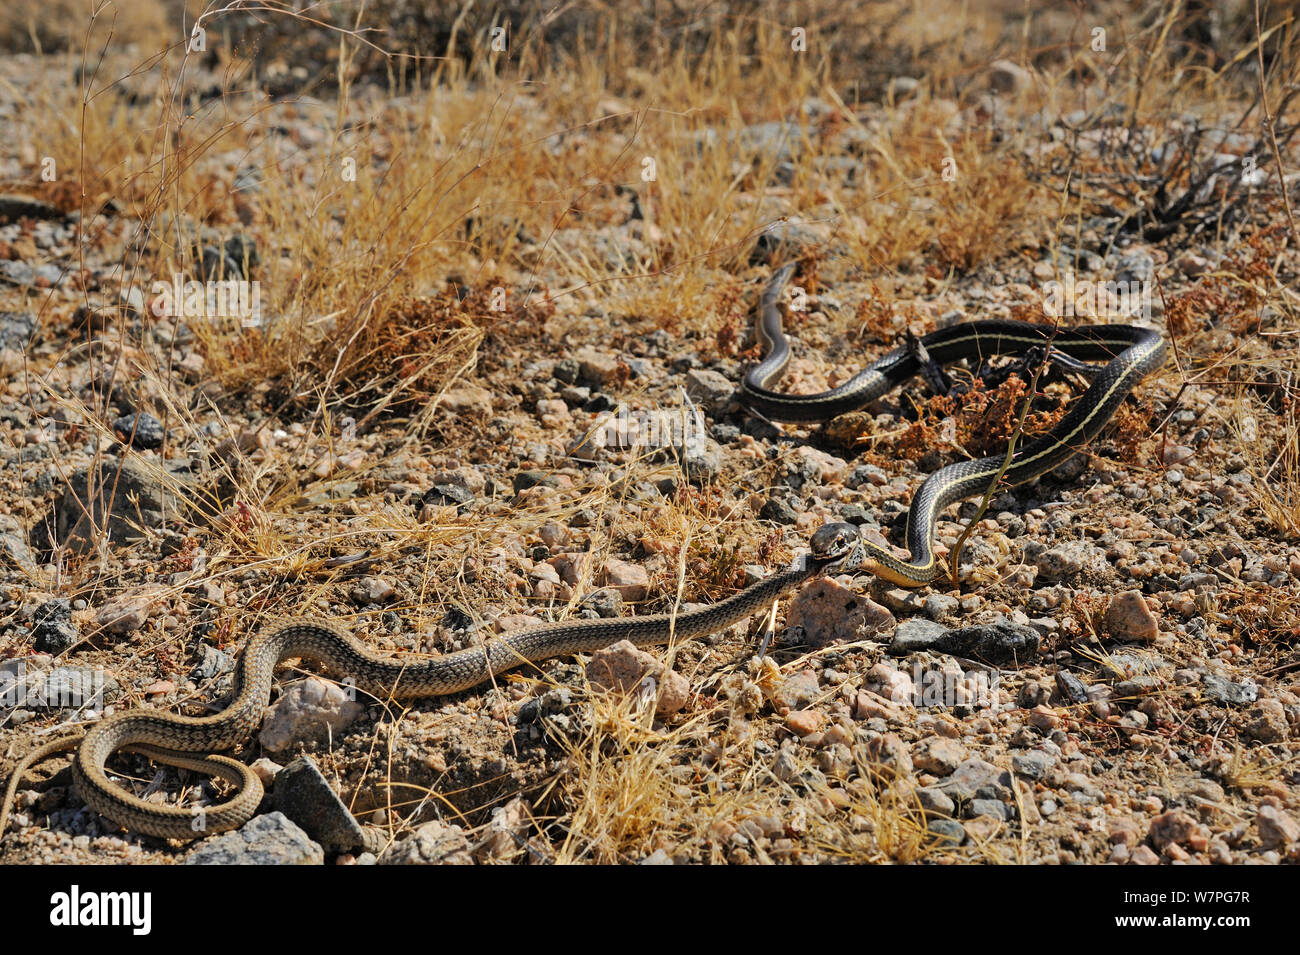 California stripped Racer (Masticophis lateralis) eating a Patch-Nosed Snake (Salvadora hexalepis) Joshua's tree National Monument, California, USA, May. Controlled conditions Stock Photo